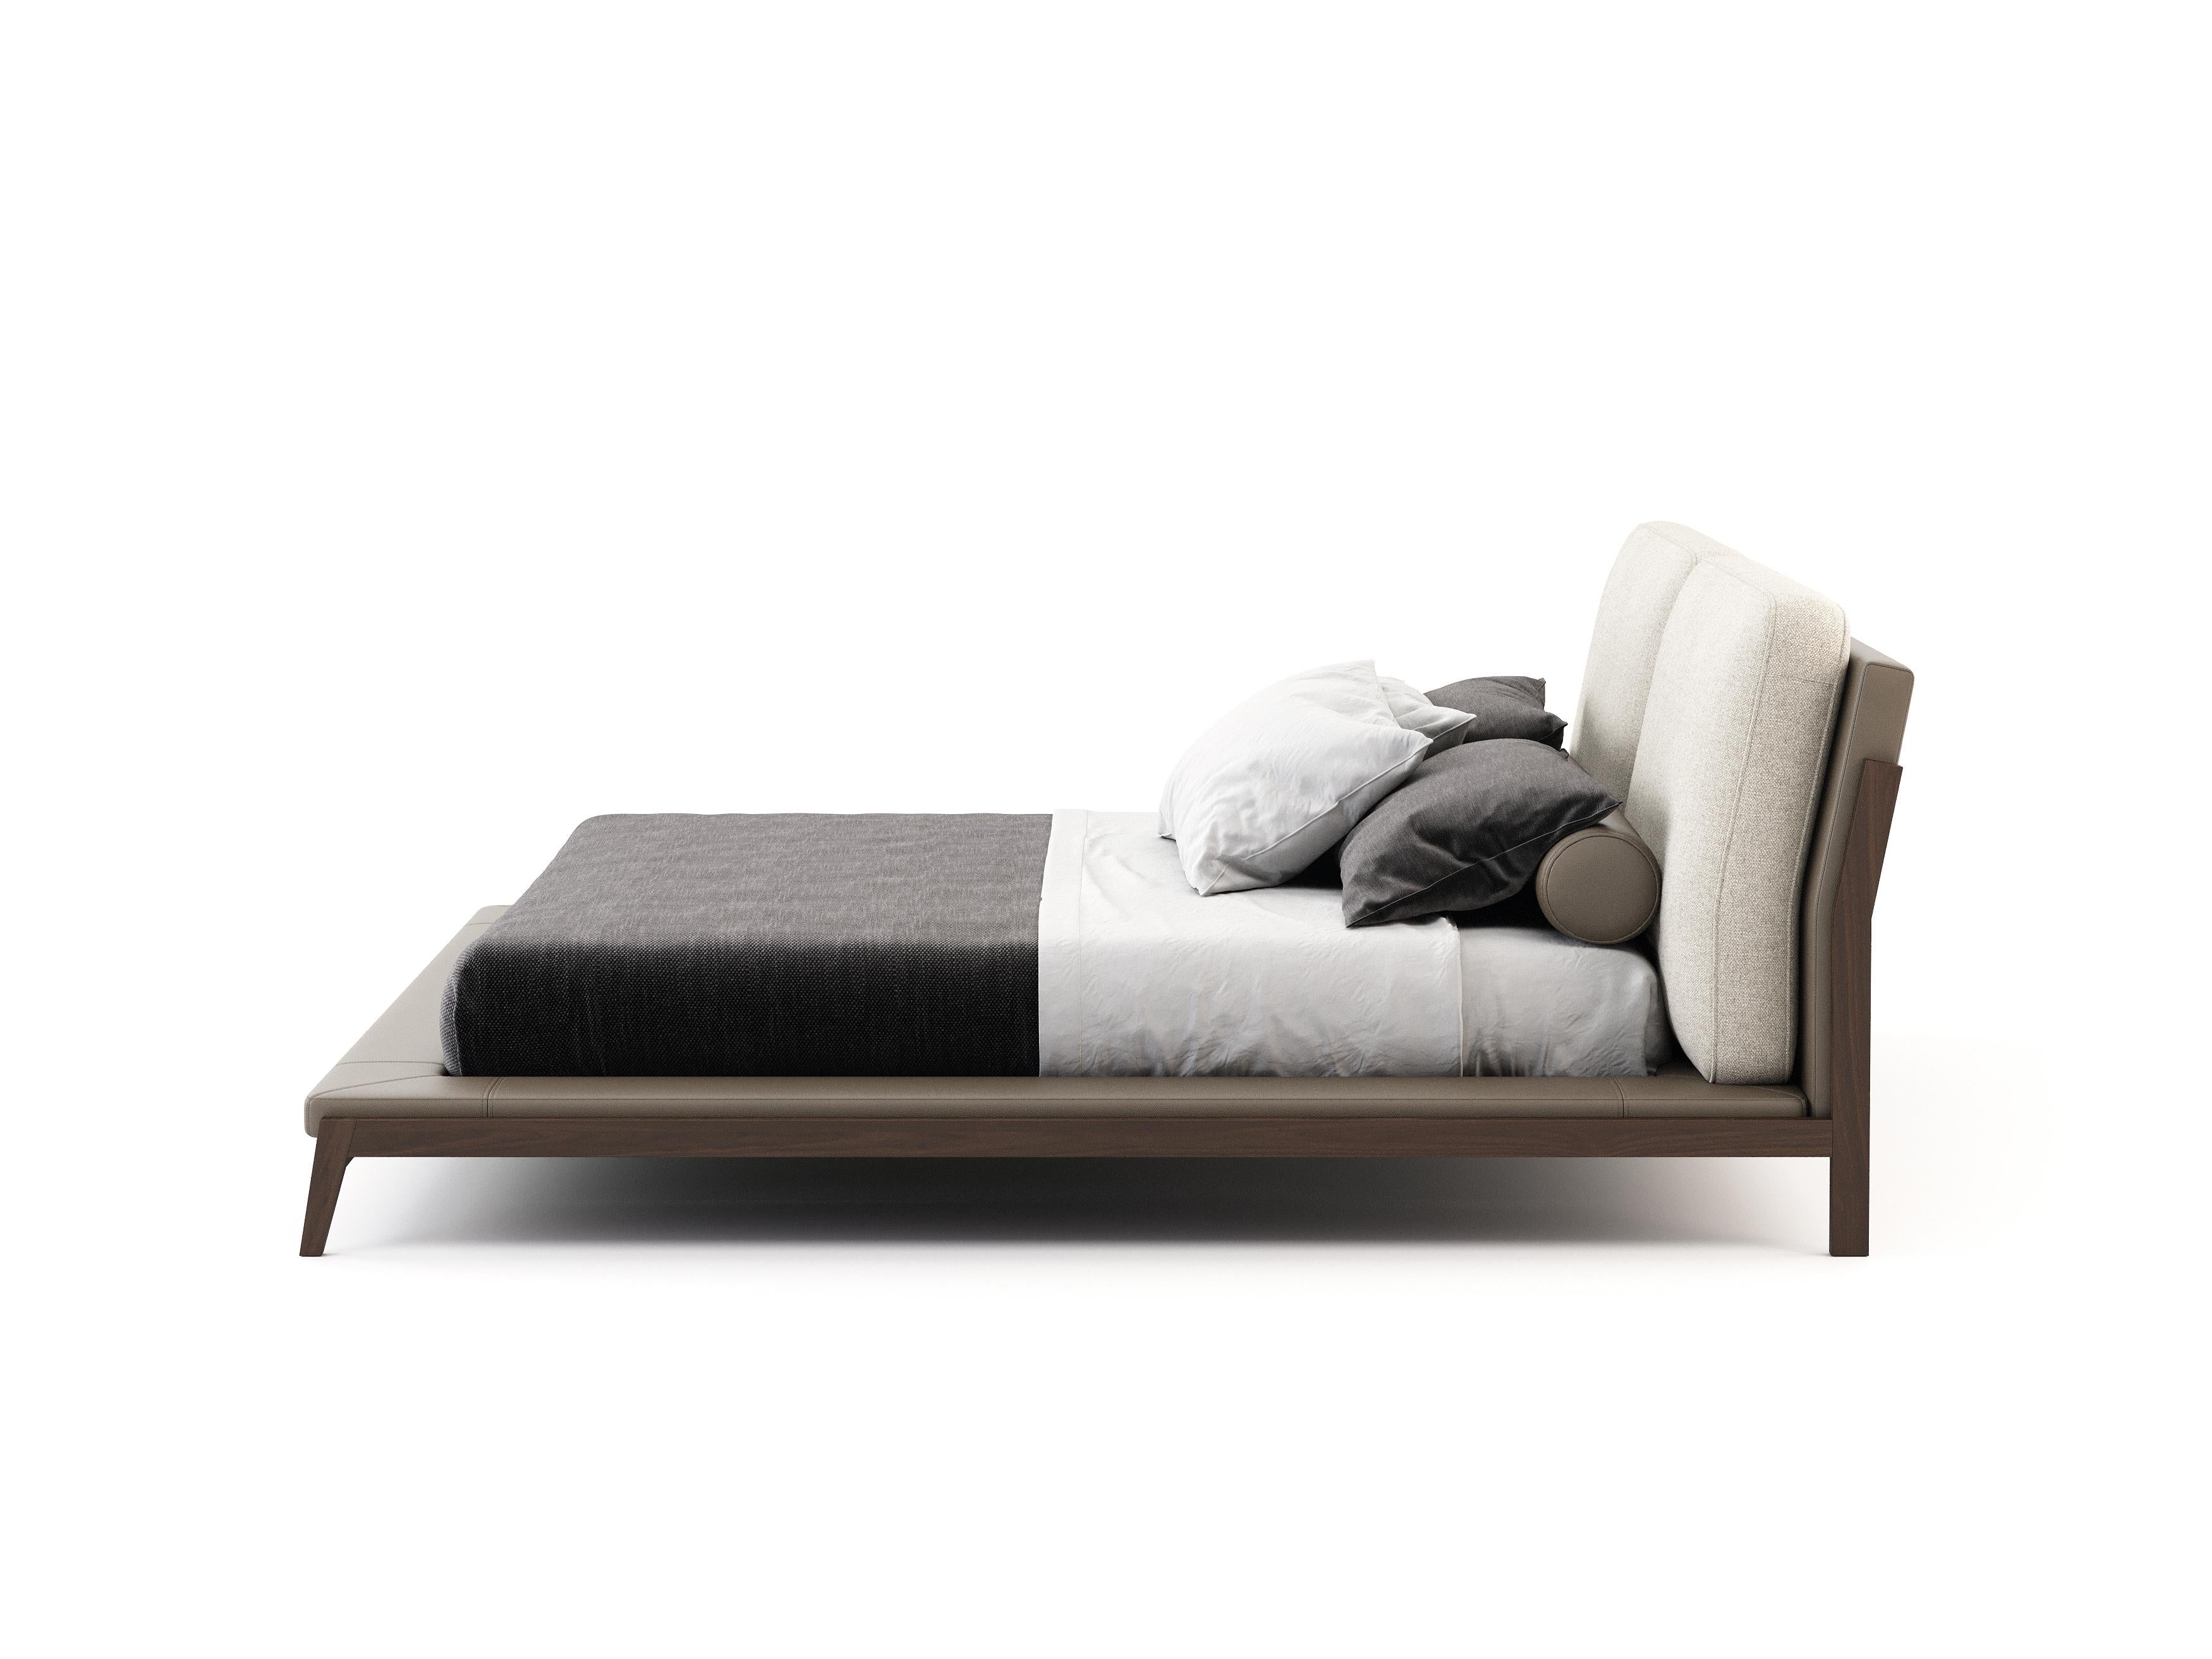 Hand-Crafted King Modern Milos Bed Made with Walnut and Leather, Handmade by Stylish Club For Sale